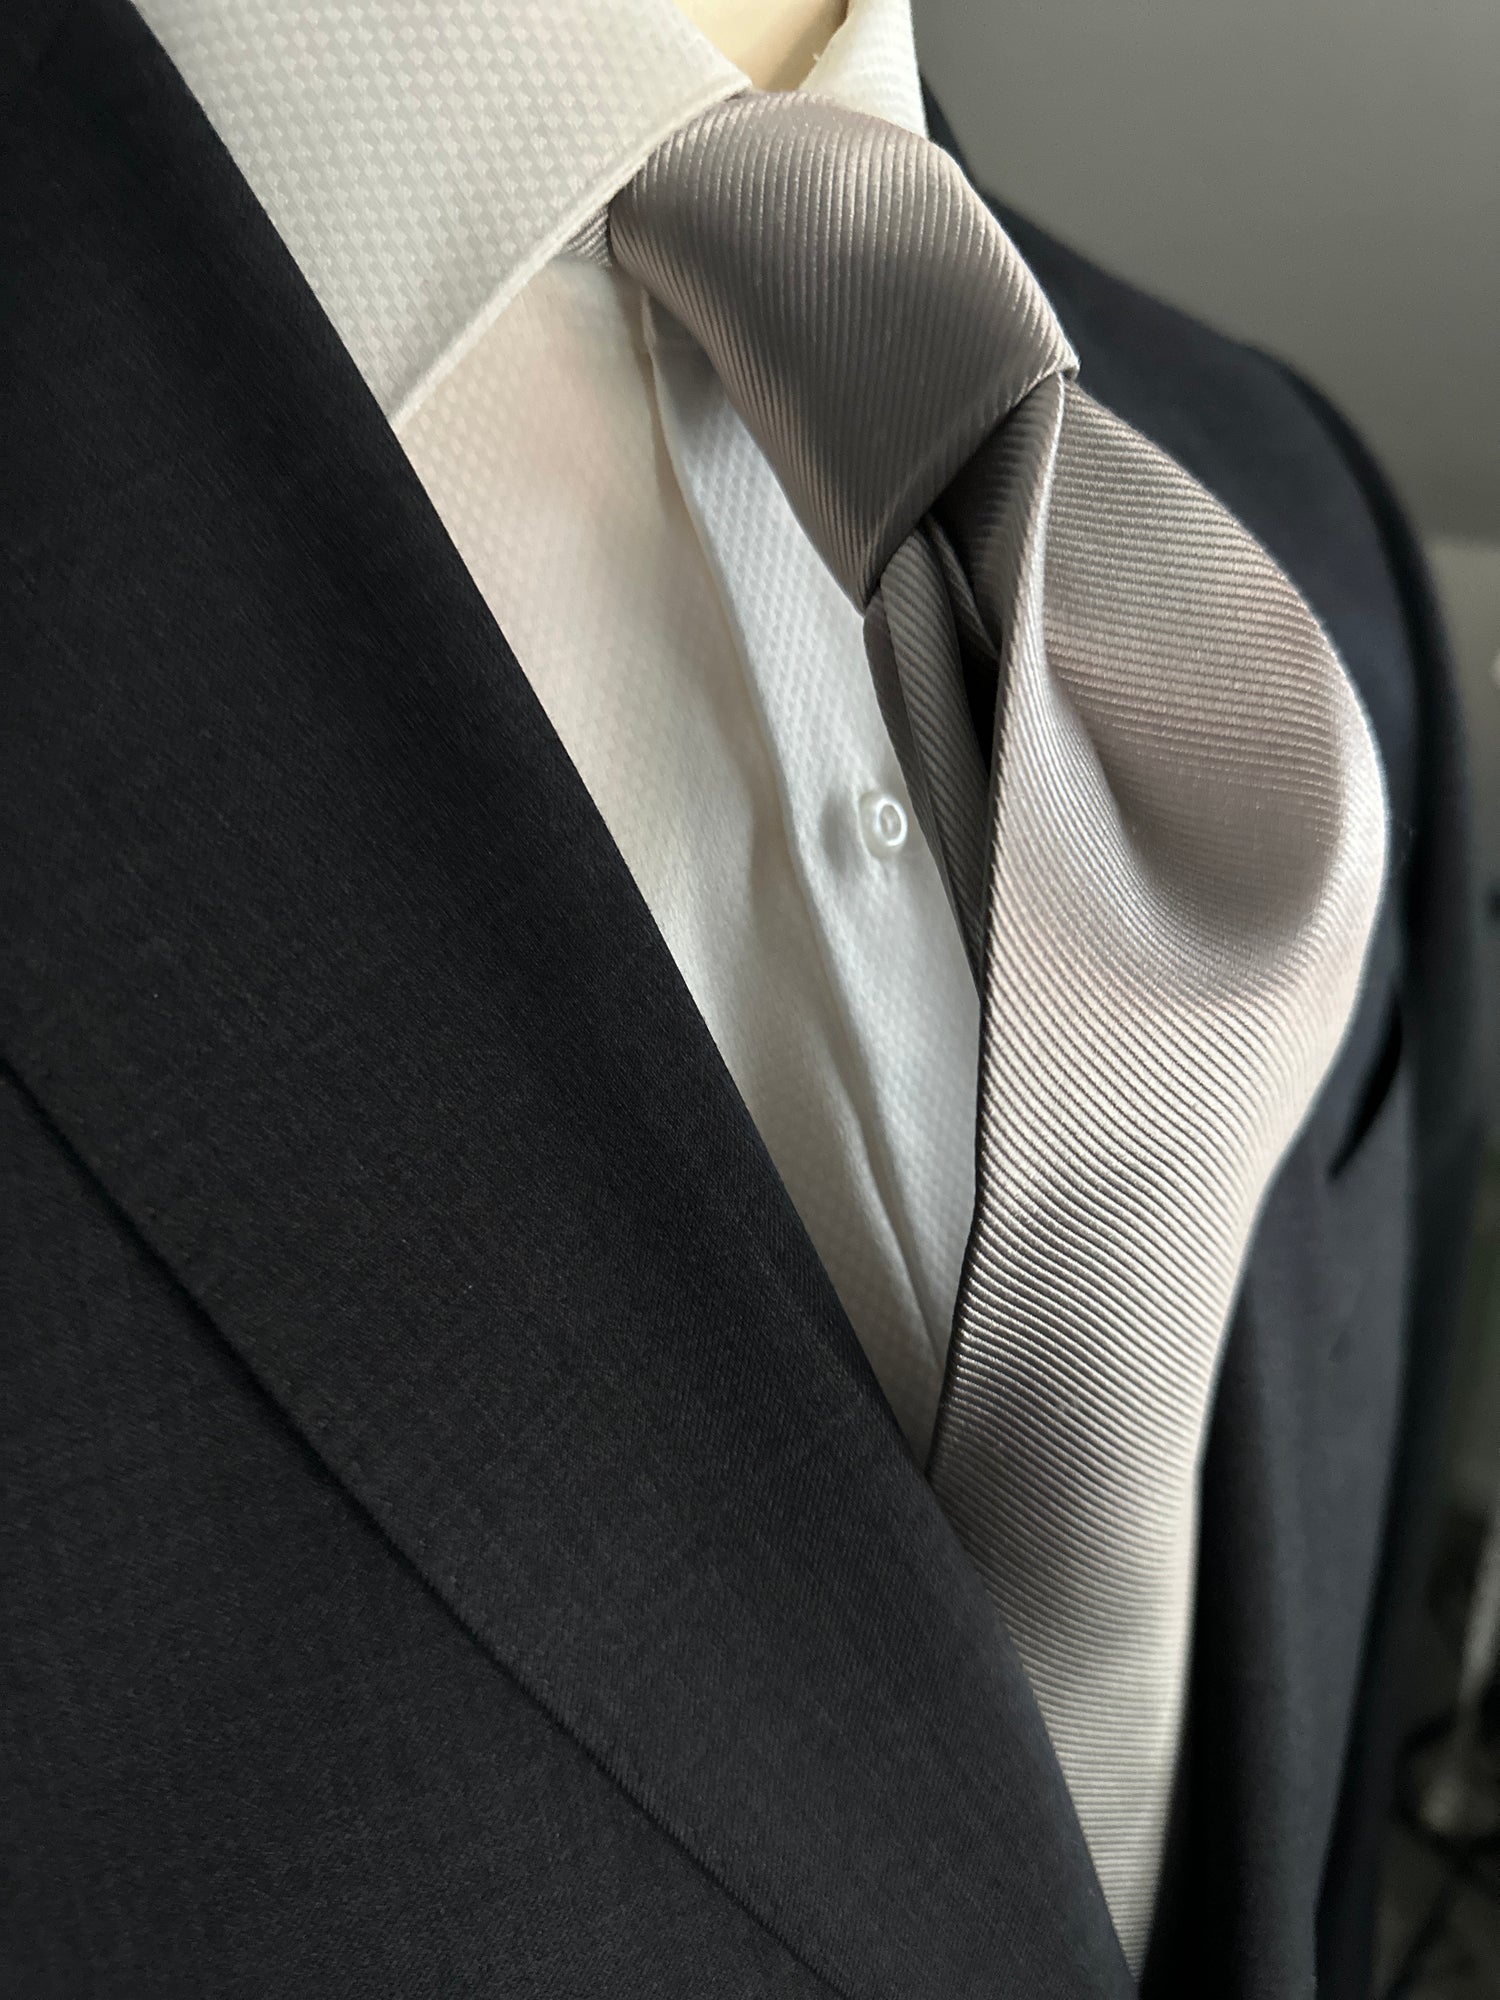 Solid ties are beautifully paired with the more busy of patters of bold stripes and heavy plaids. However, there is something so understated and elegant about a solid tie with a solid suit. Whether that be navy, charcoal or black a silver tie fits well with a white shirt and even a navy blazer with jeans. Silver necktie can also be used with formal wear. 